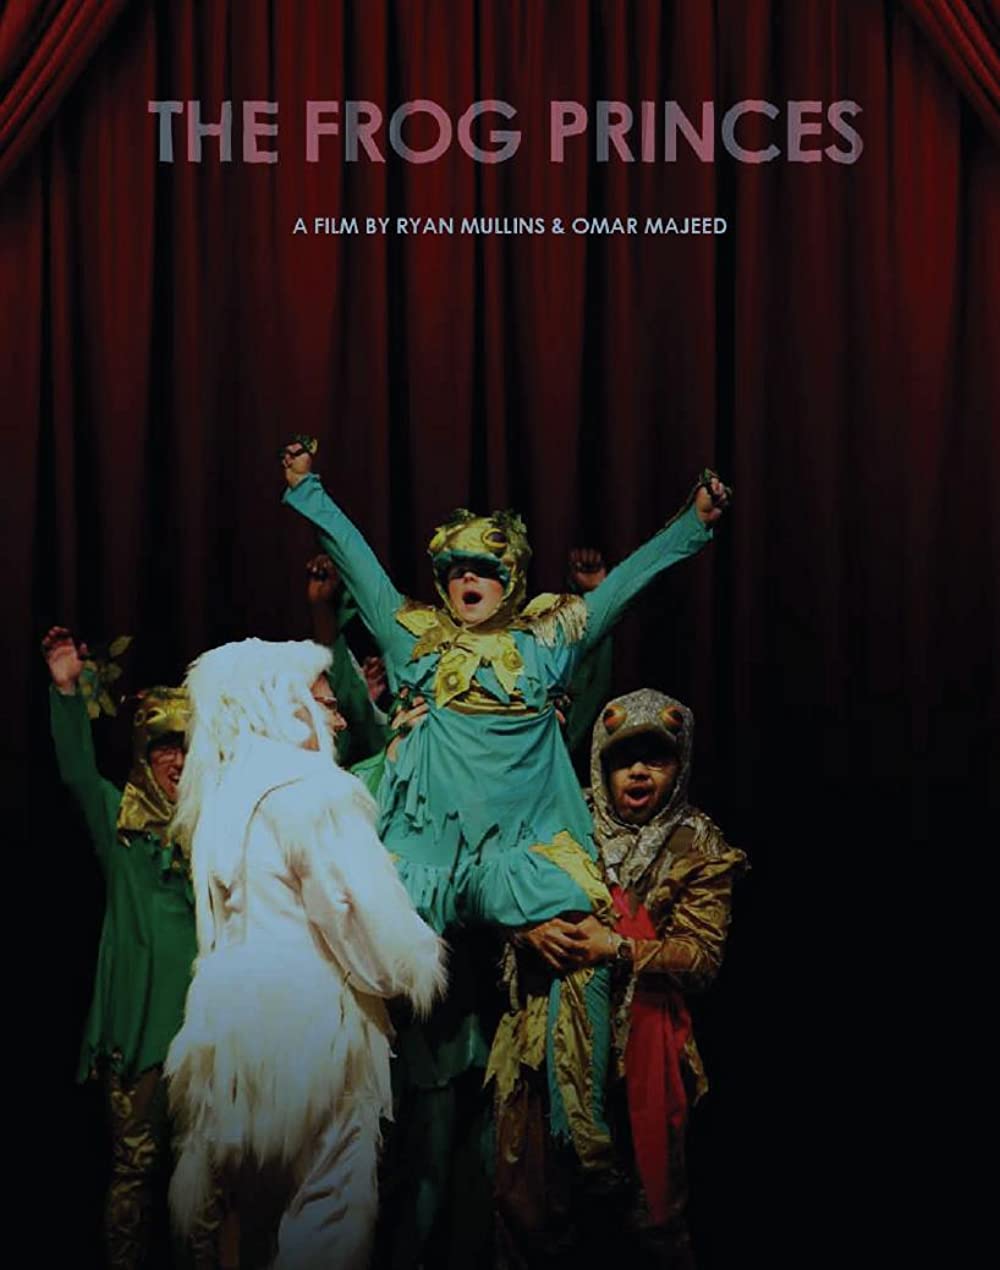 Film Poster "The Frog Princes"